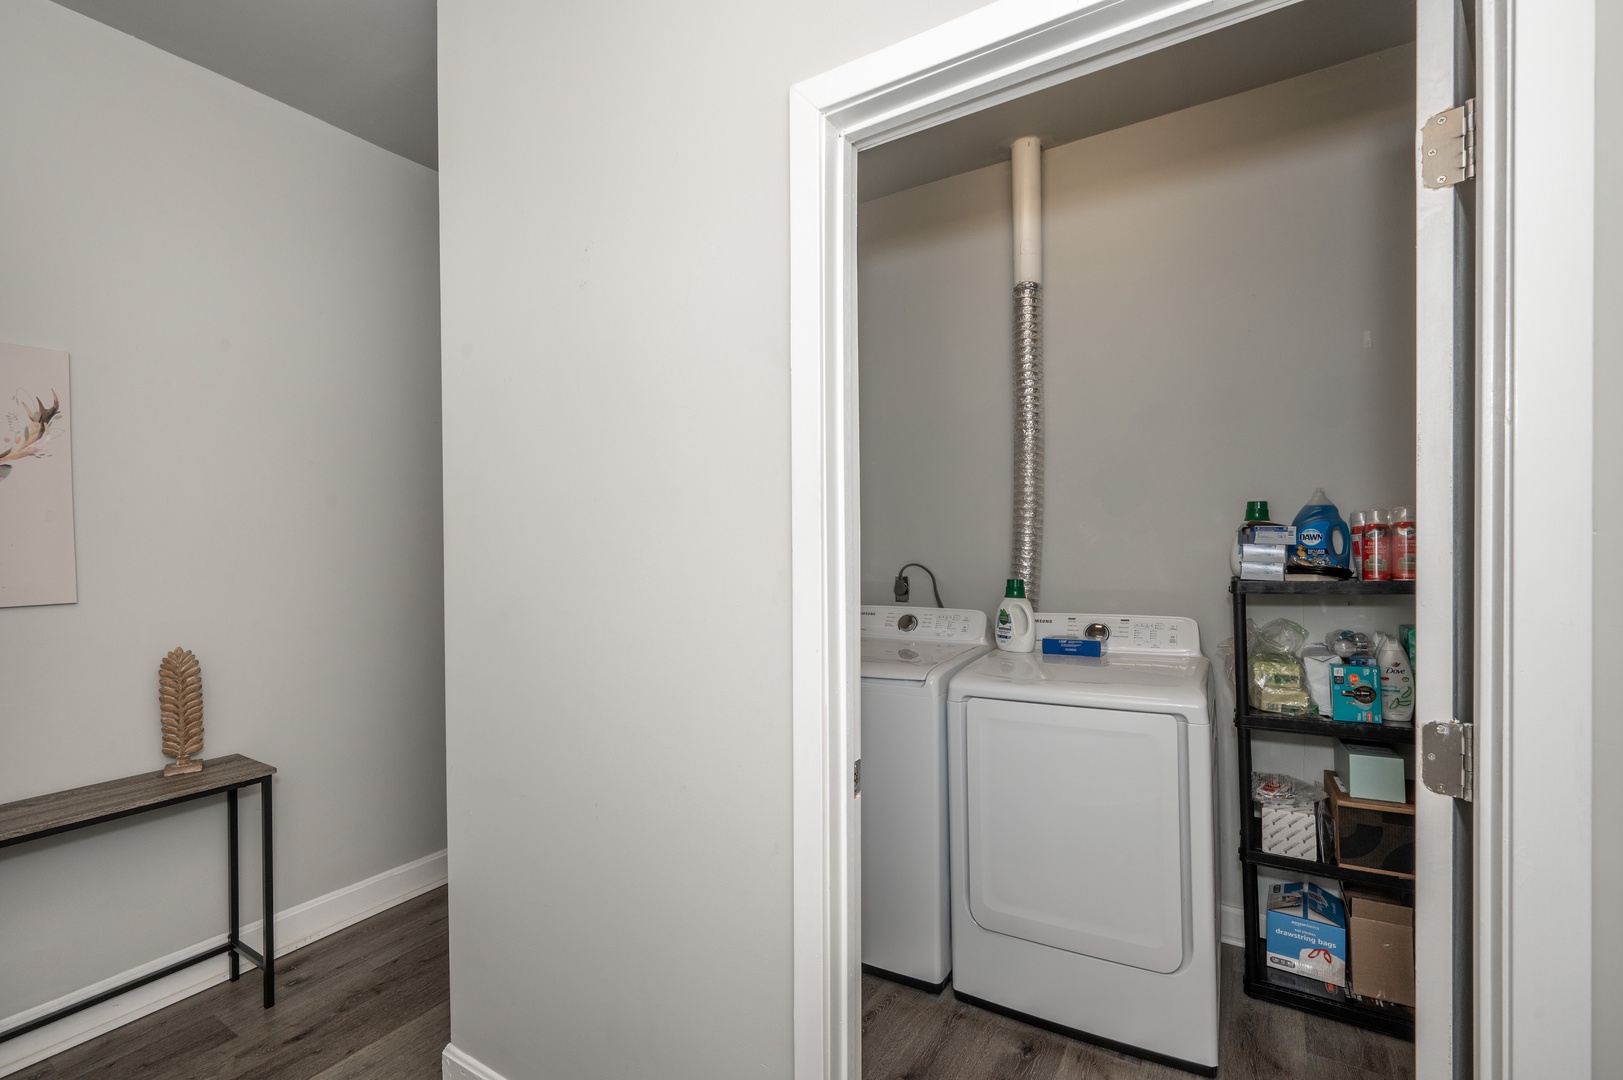 Private Laundry is available in a secluded laundry room off the entryway